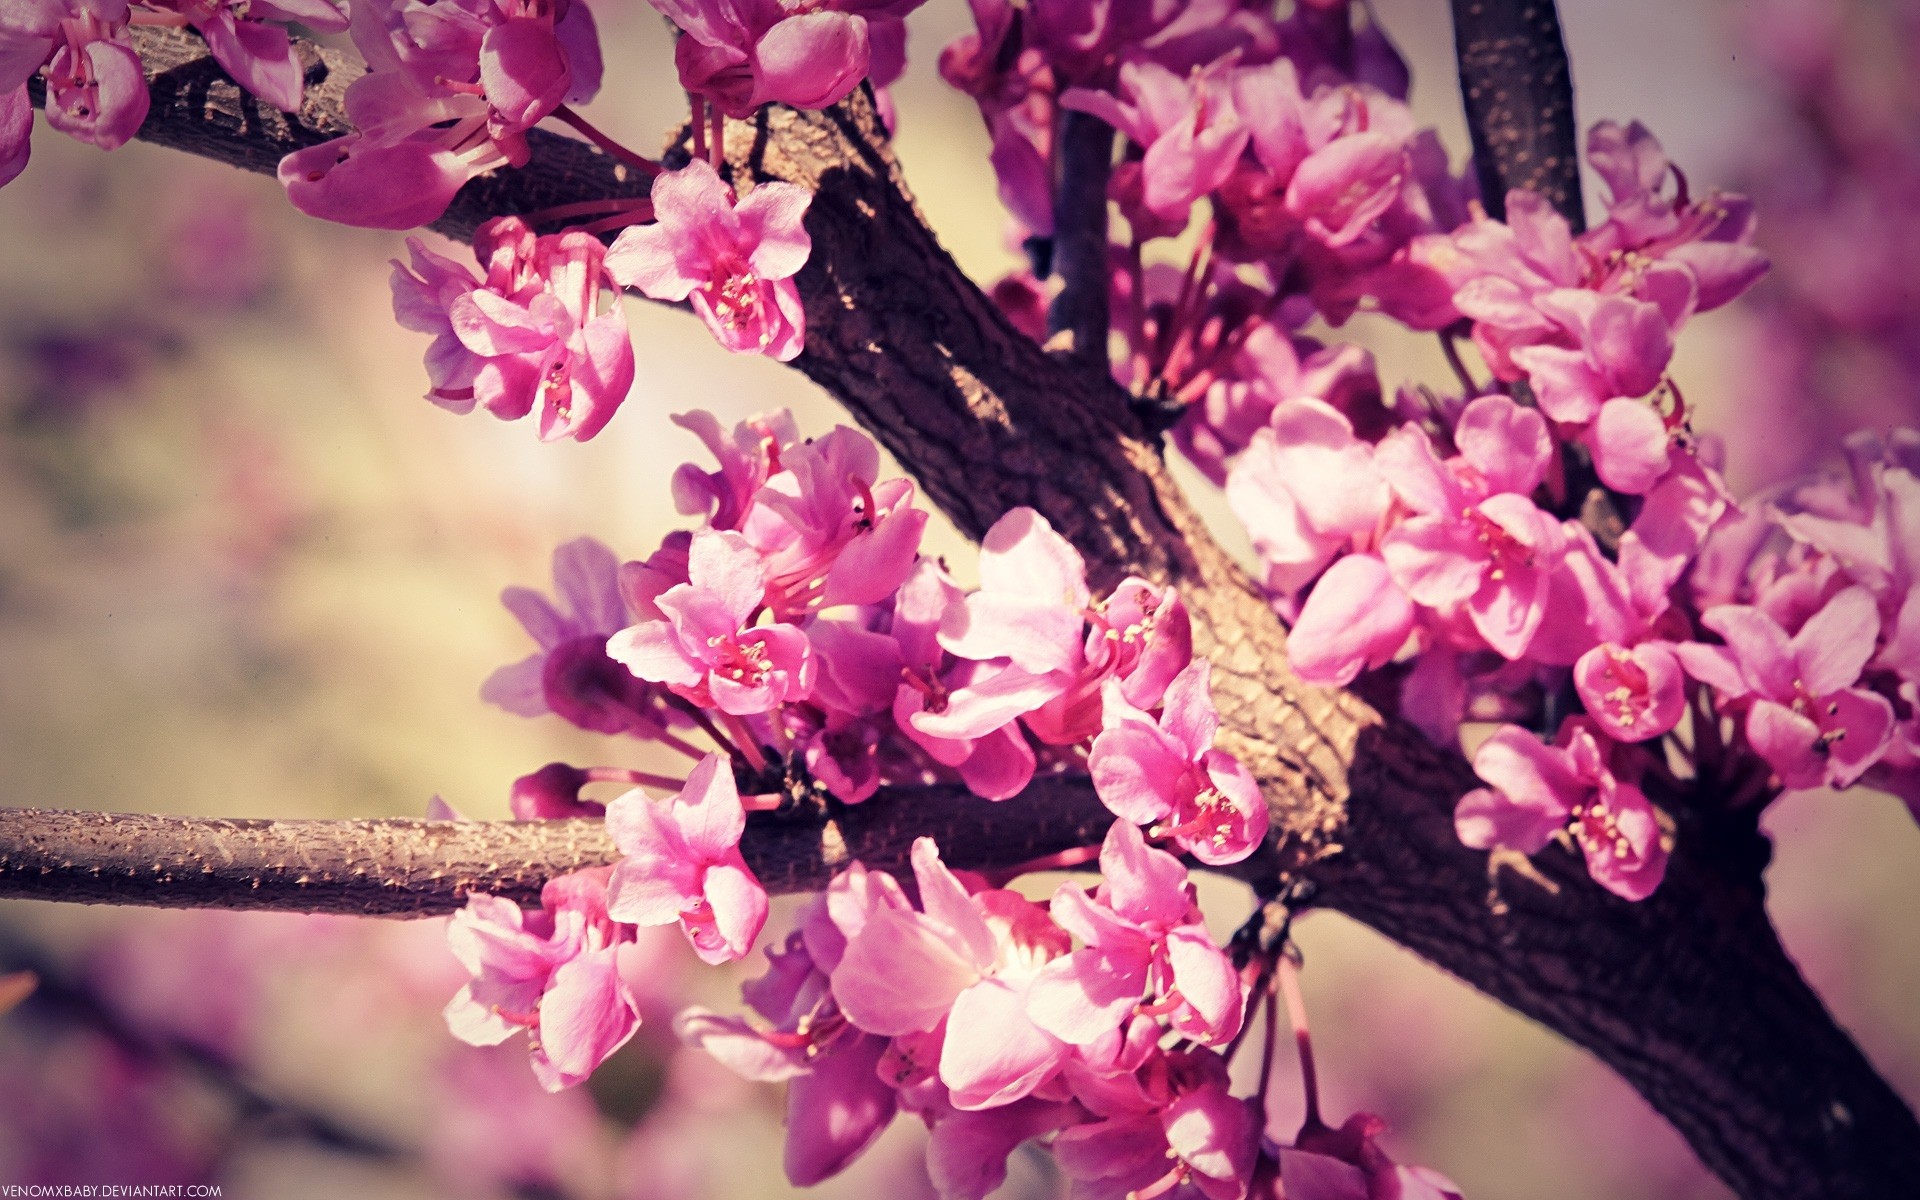 spring flower nature flora branch blooming tree petal garden floral season leaf beautiful color close-up growth bud bright cherry outdoors blossom